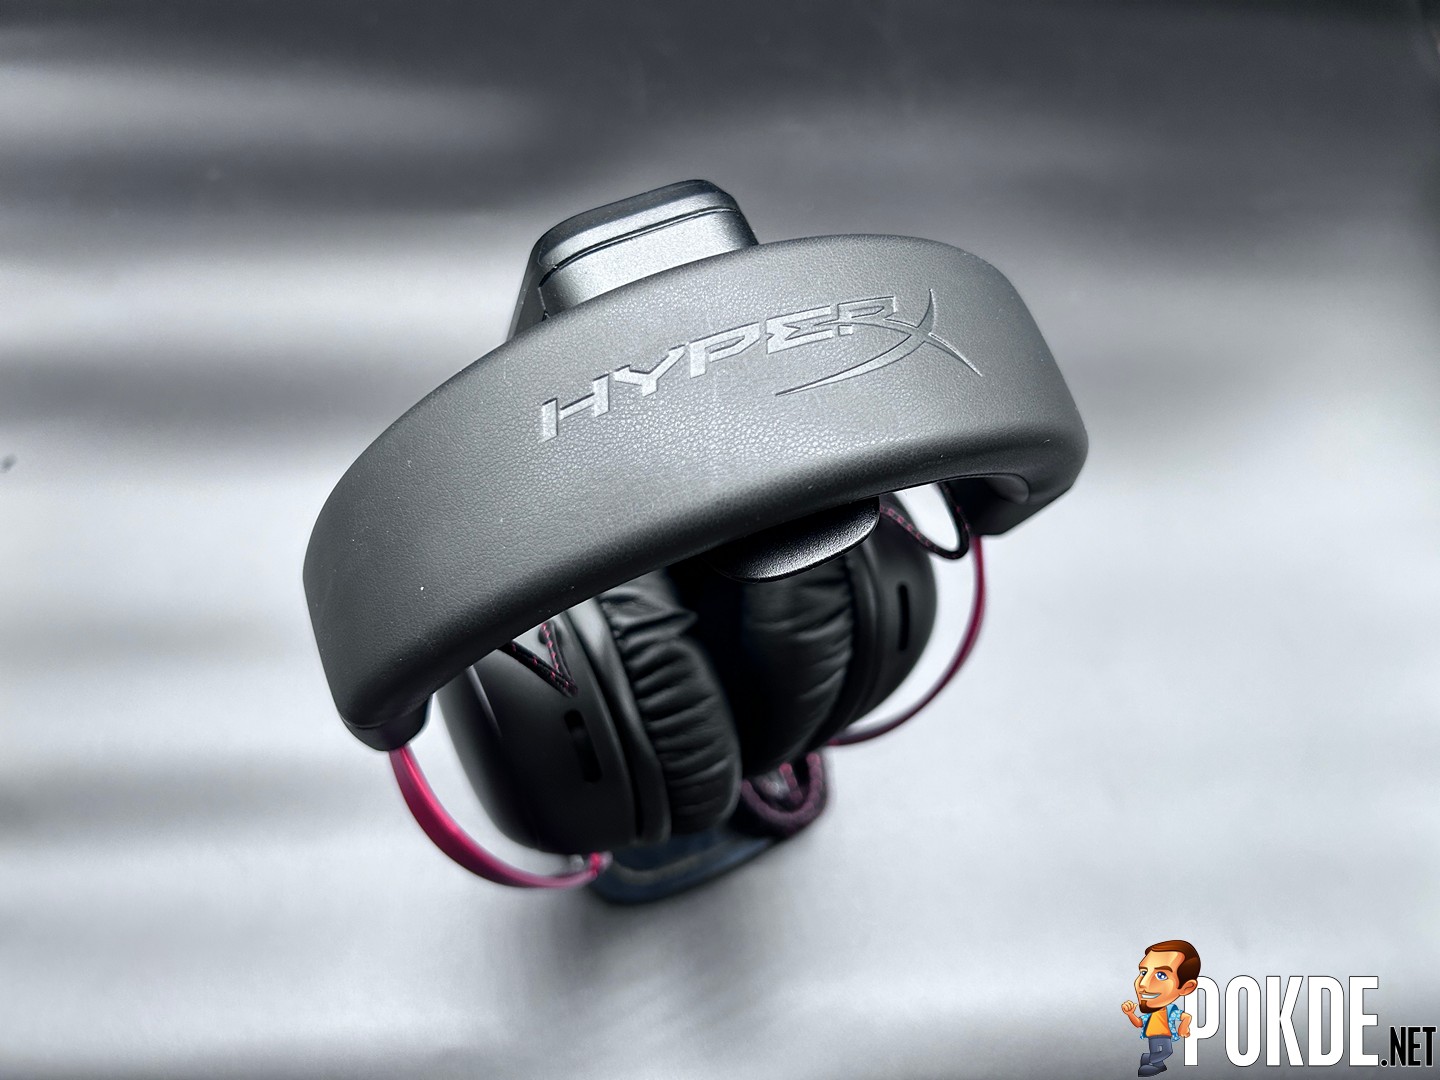 HyperX Cloud III with 53mm Drivers, 3.5mm, USB-A, & USB-C Connectors  Launched